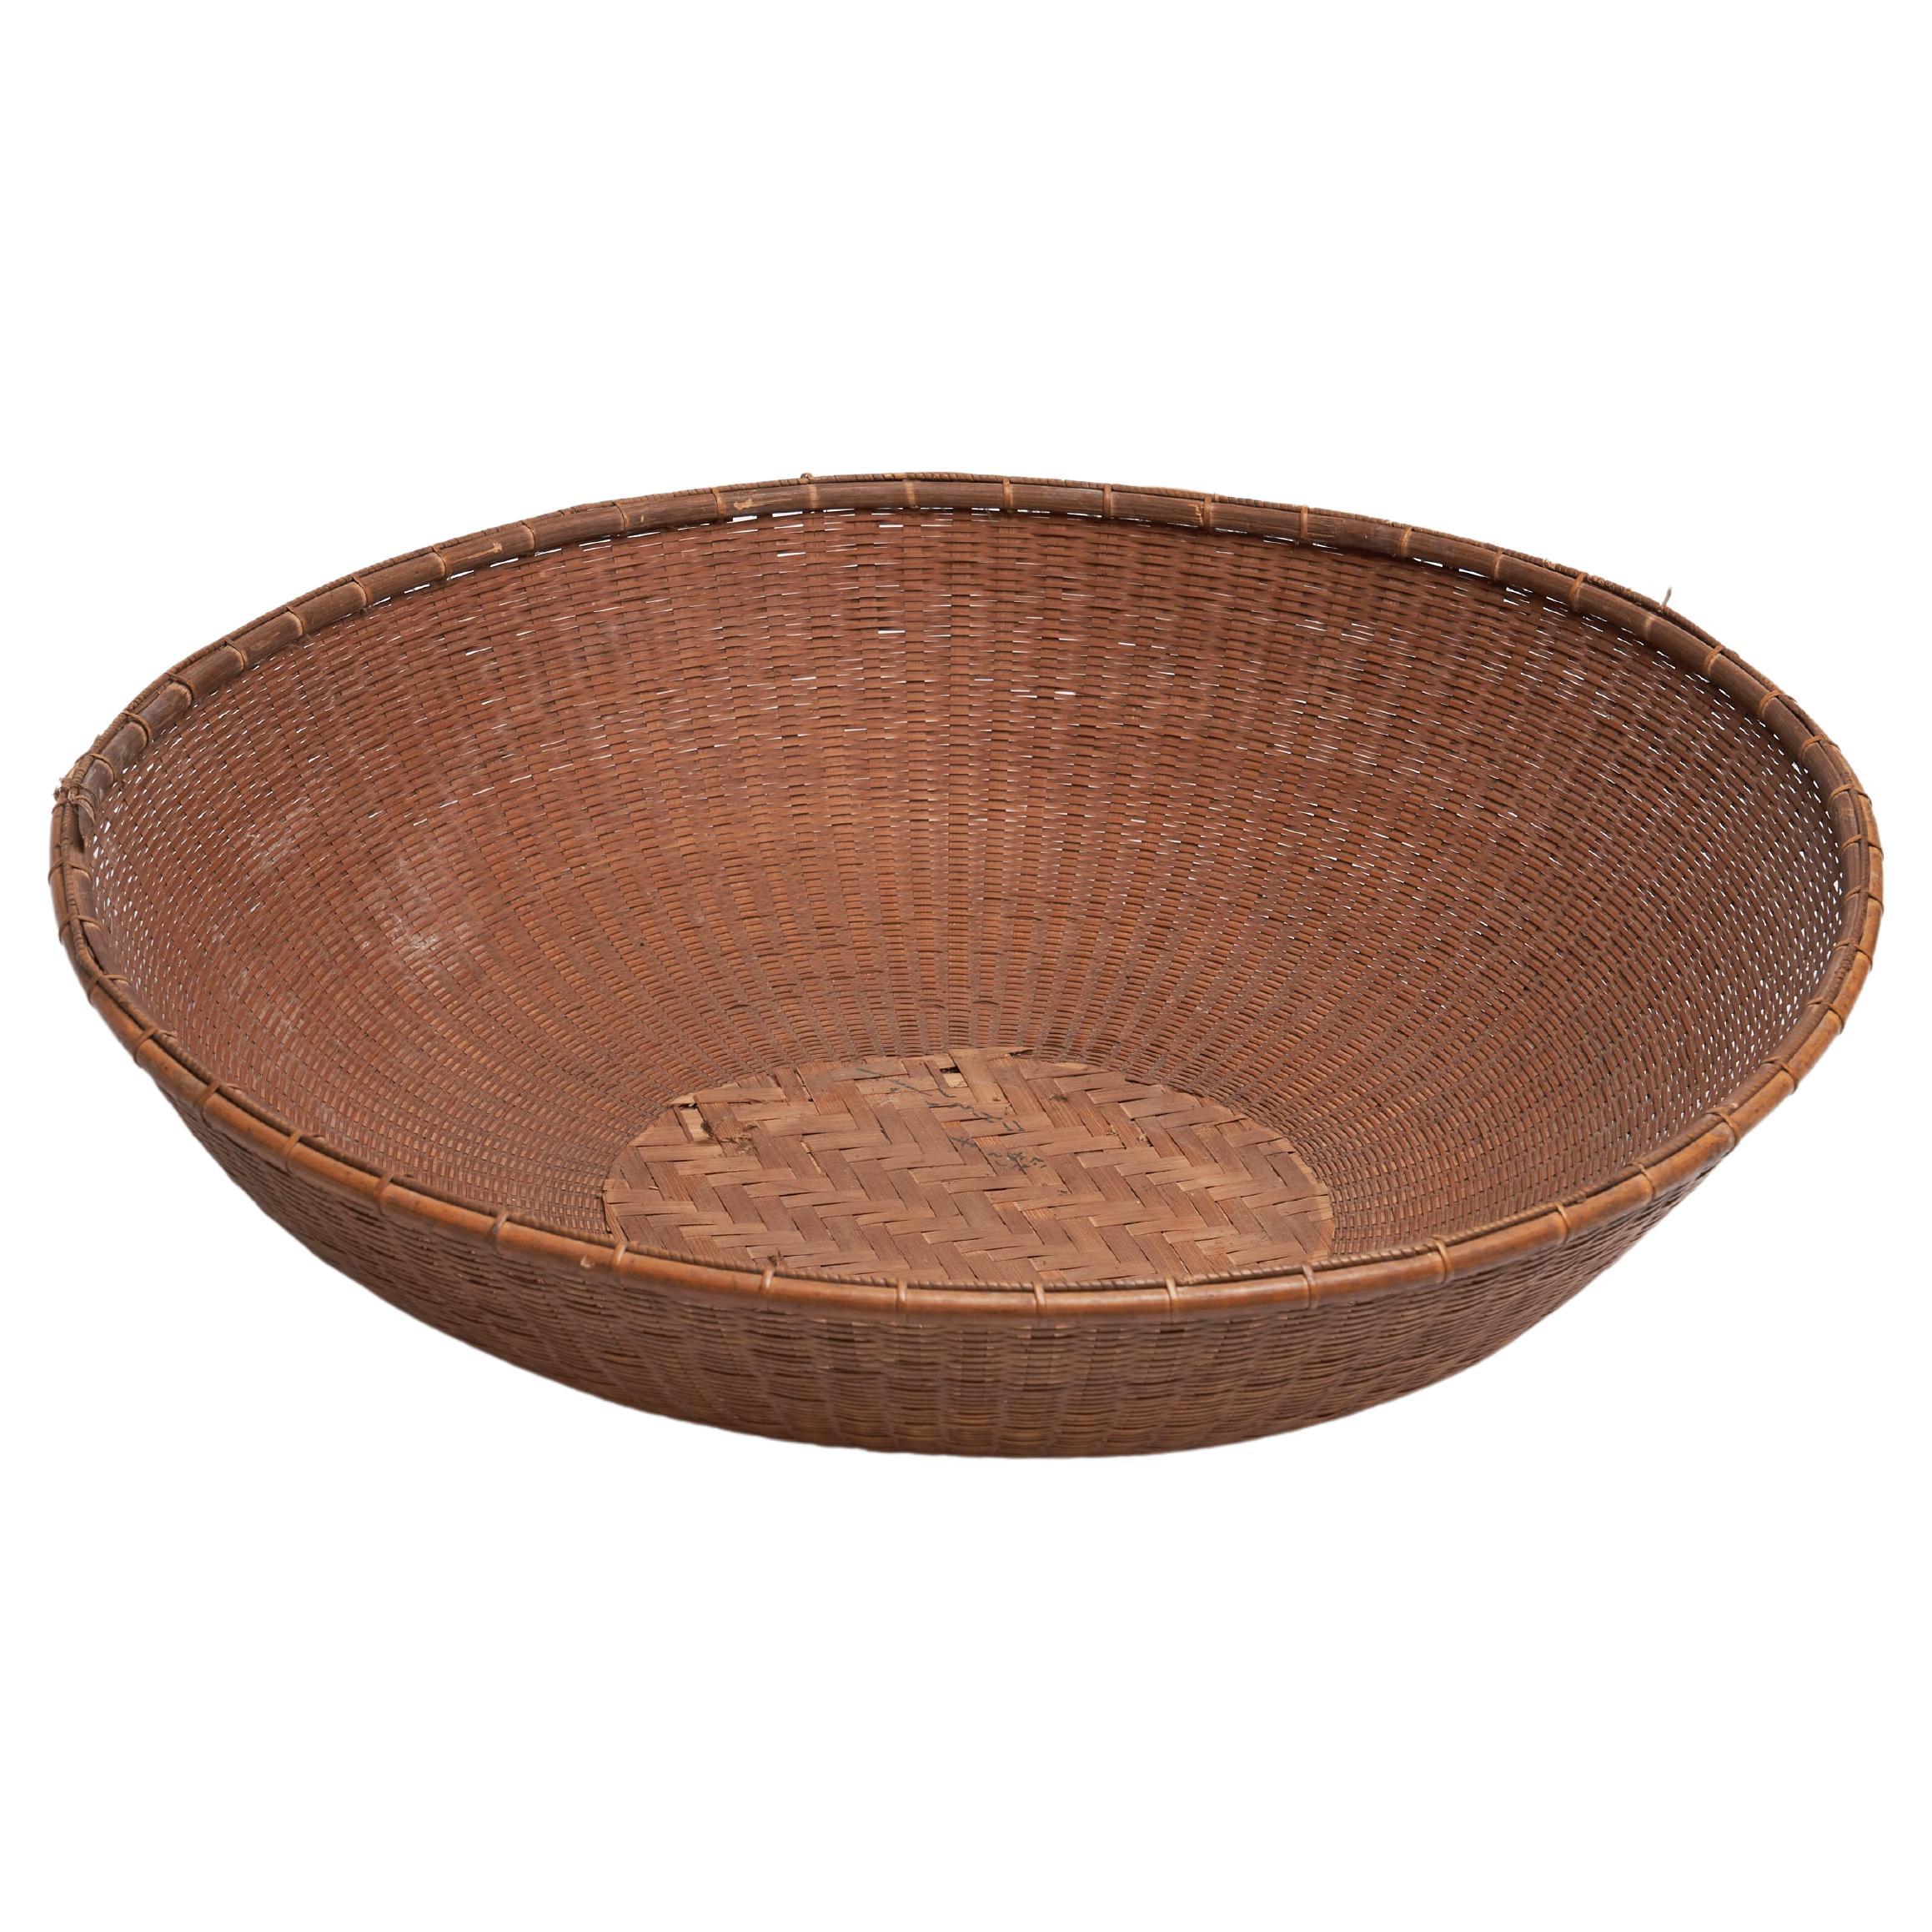 Large Late 19th Century Japanese Bamboo Basket For Sale